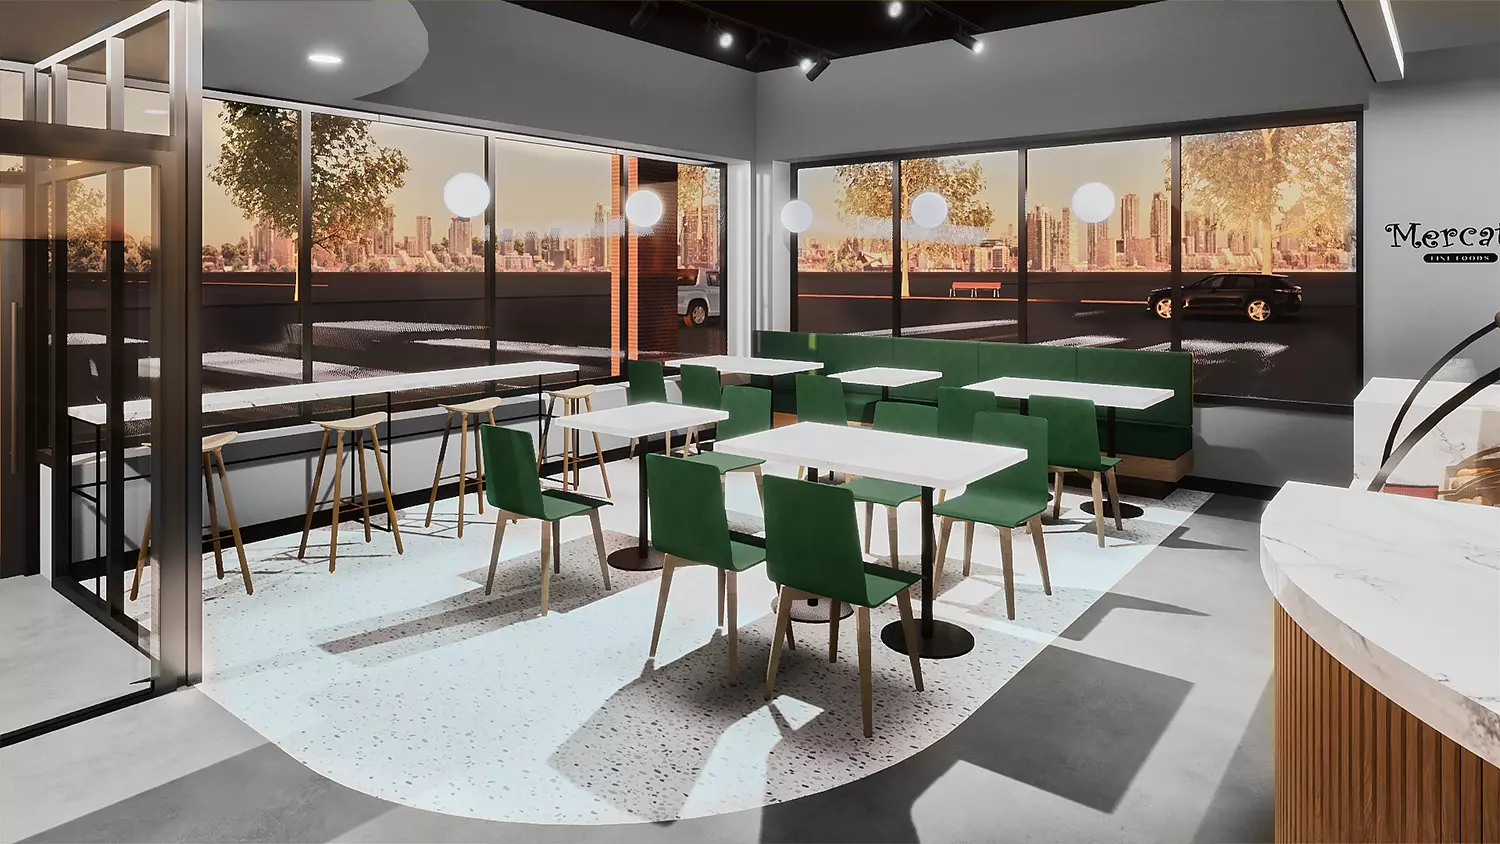 Interior design project for Mercato Fine Foods. Designed 3D rendering for food court